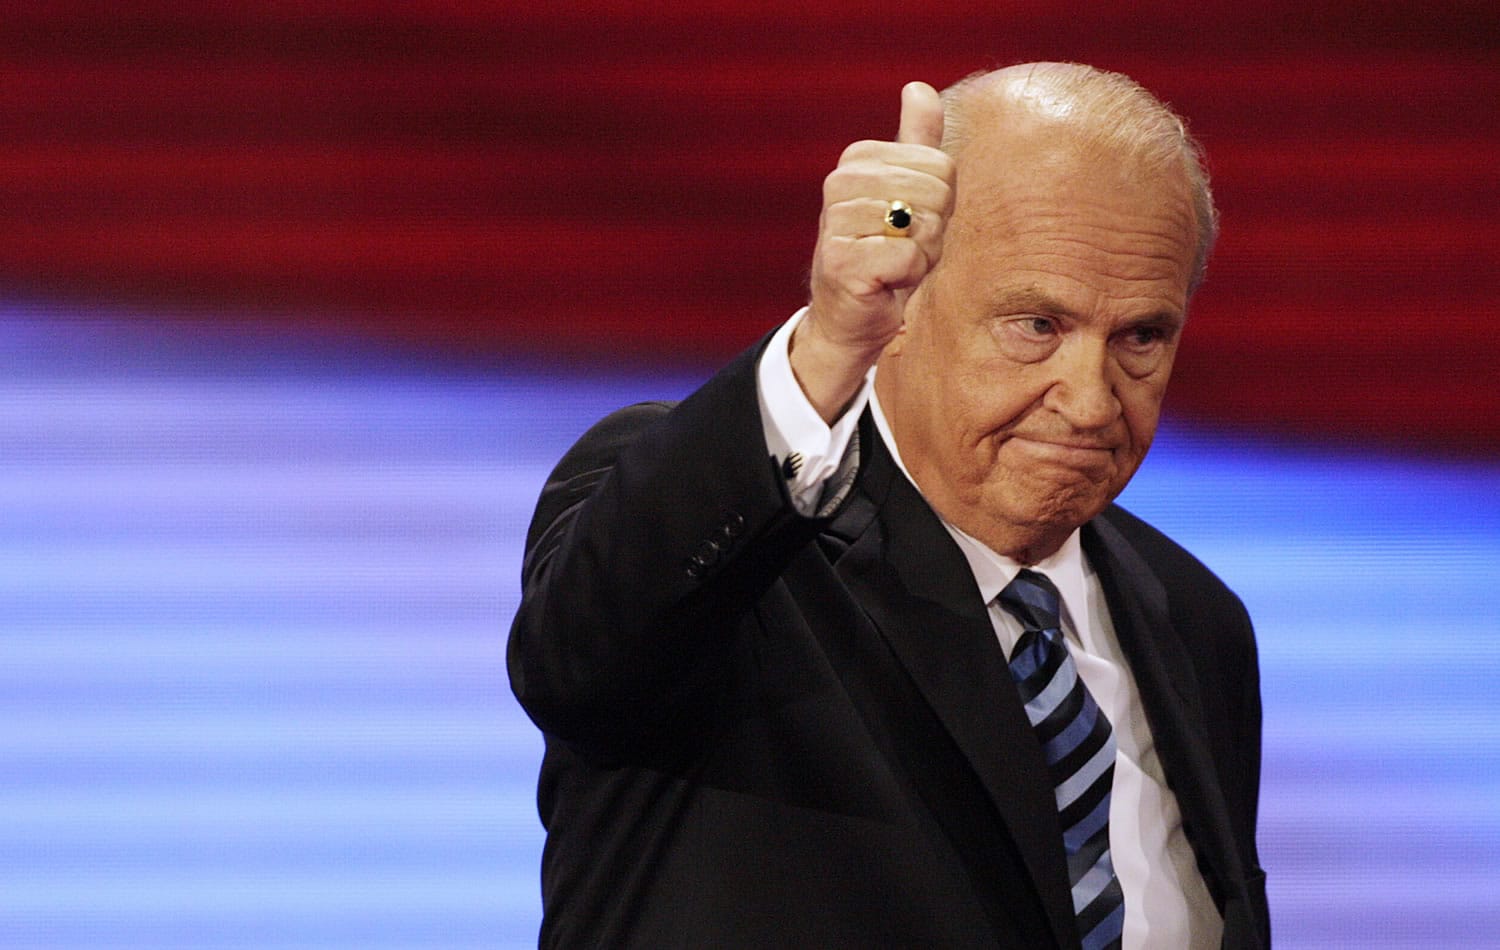 Former Sen. Fred Thompson, R-Tenn., gives thumbs up Sept. 2, 2008, after speaking at the Republican National Convention in St. Paul, Minn. Thompson died Sunday in Nashville, Tenn., after a recurrence of lymphoma, his family said in a statement. He was 73.